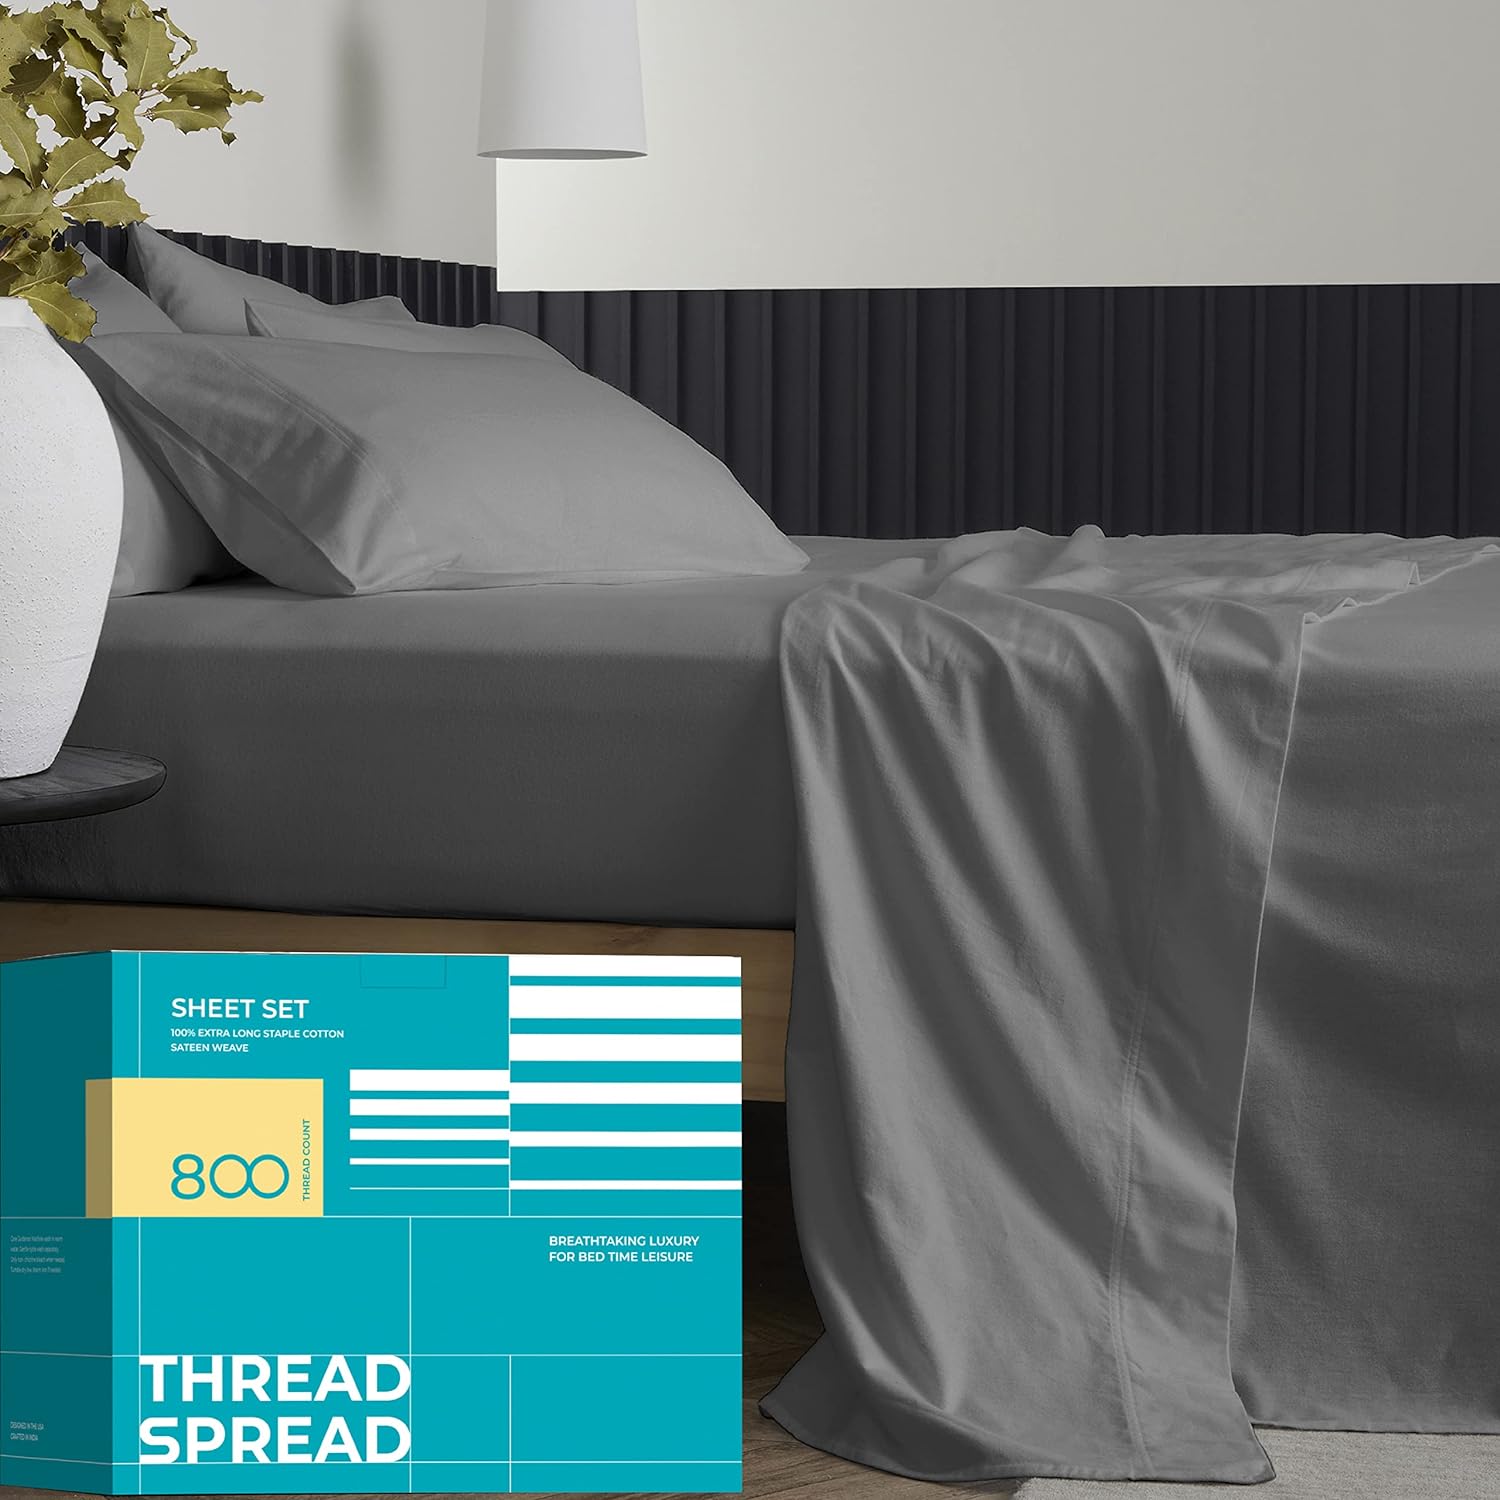 THREAD SPREAD 100% Egyptian Cotton Full Size Bed Sheets - 800 TC 4Pc Dark Grey Bed Sheet for Full Size Bed, Sateen Weave Luxury Hotel Sheets, Soft Cooling Bedsheet, Fits Mattress Upto 18" Deep Pocket